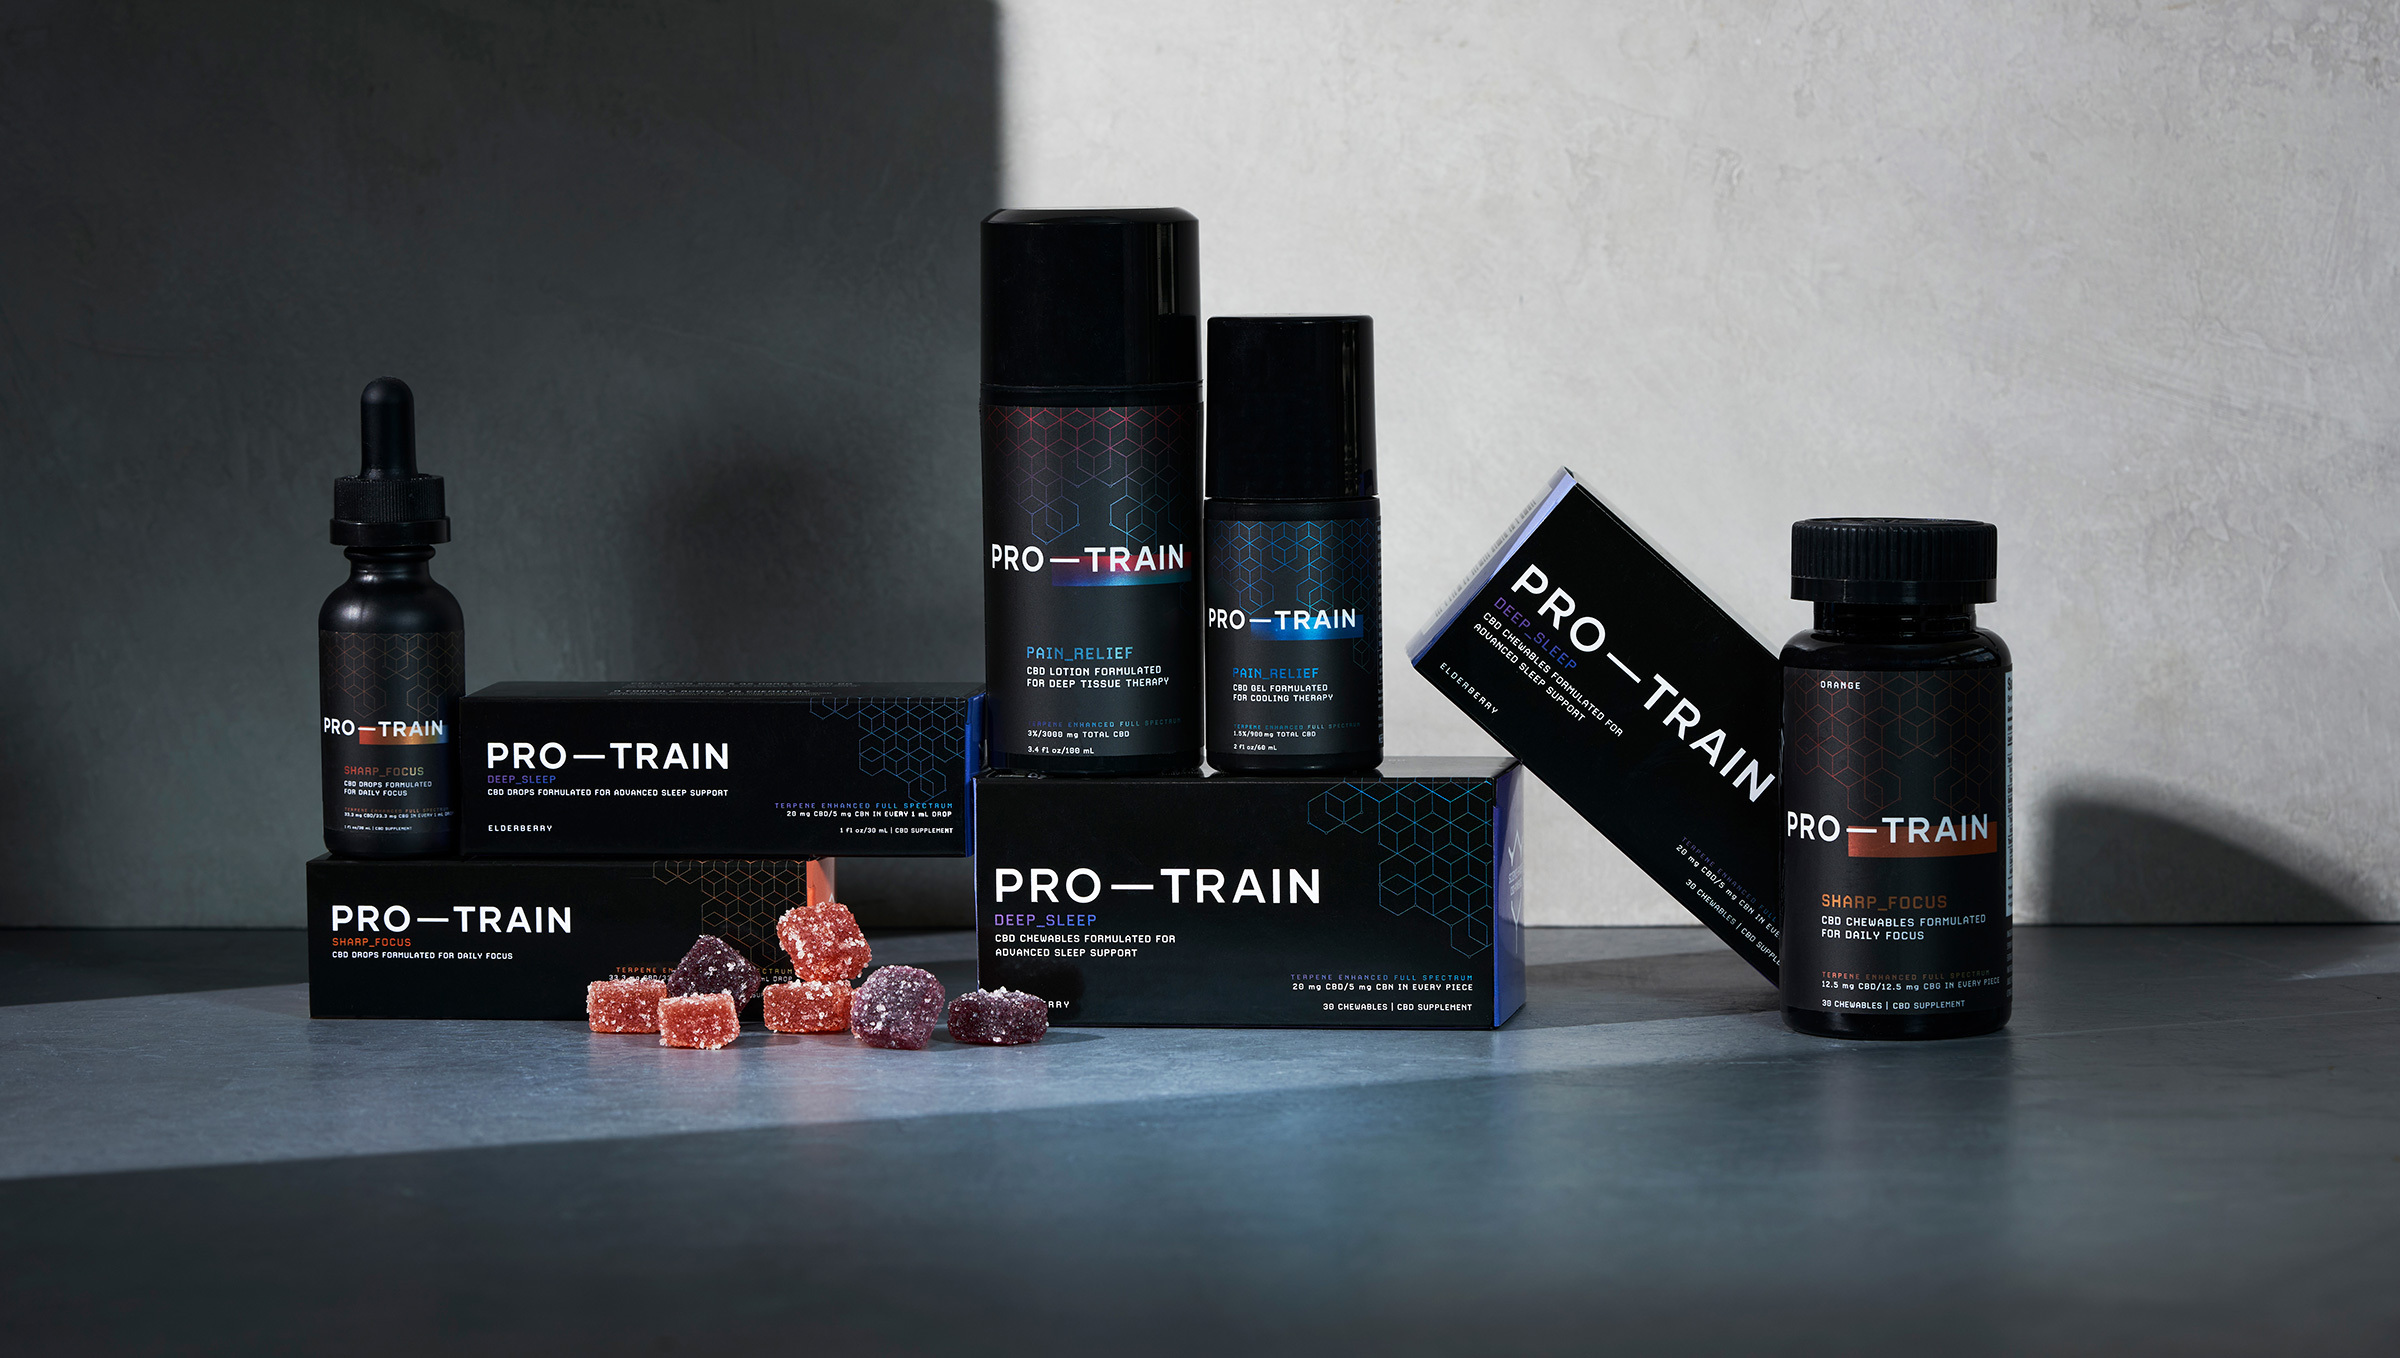 Several Pro-Train products with branding